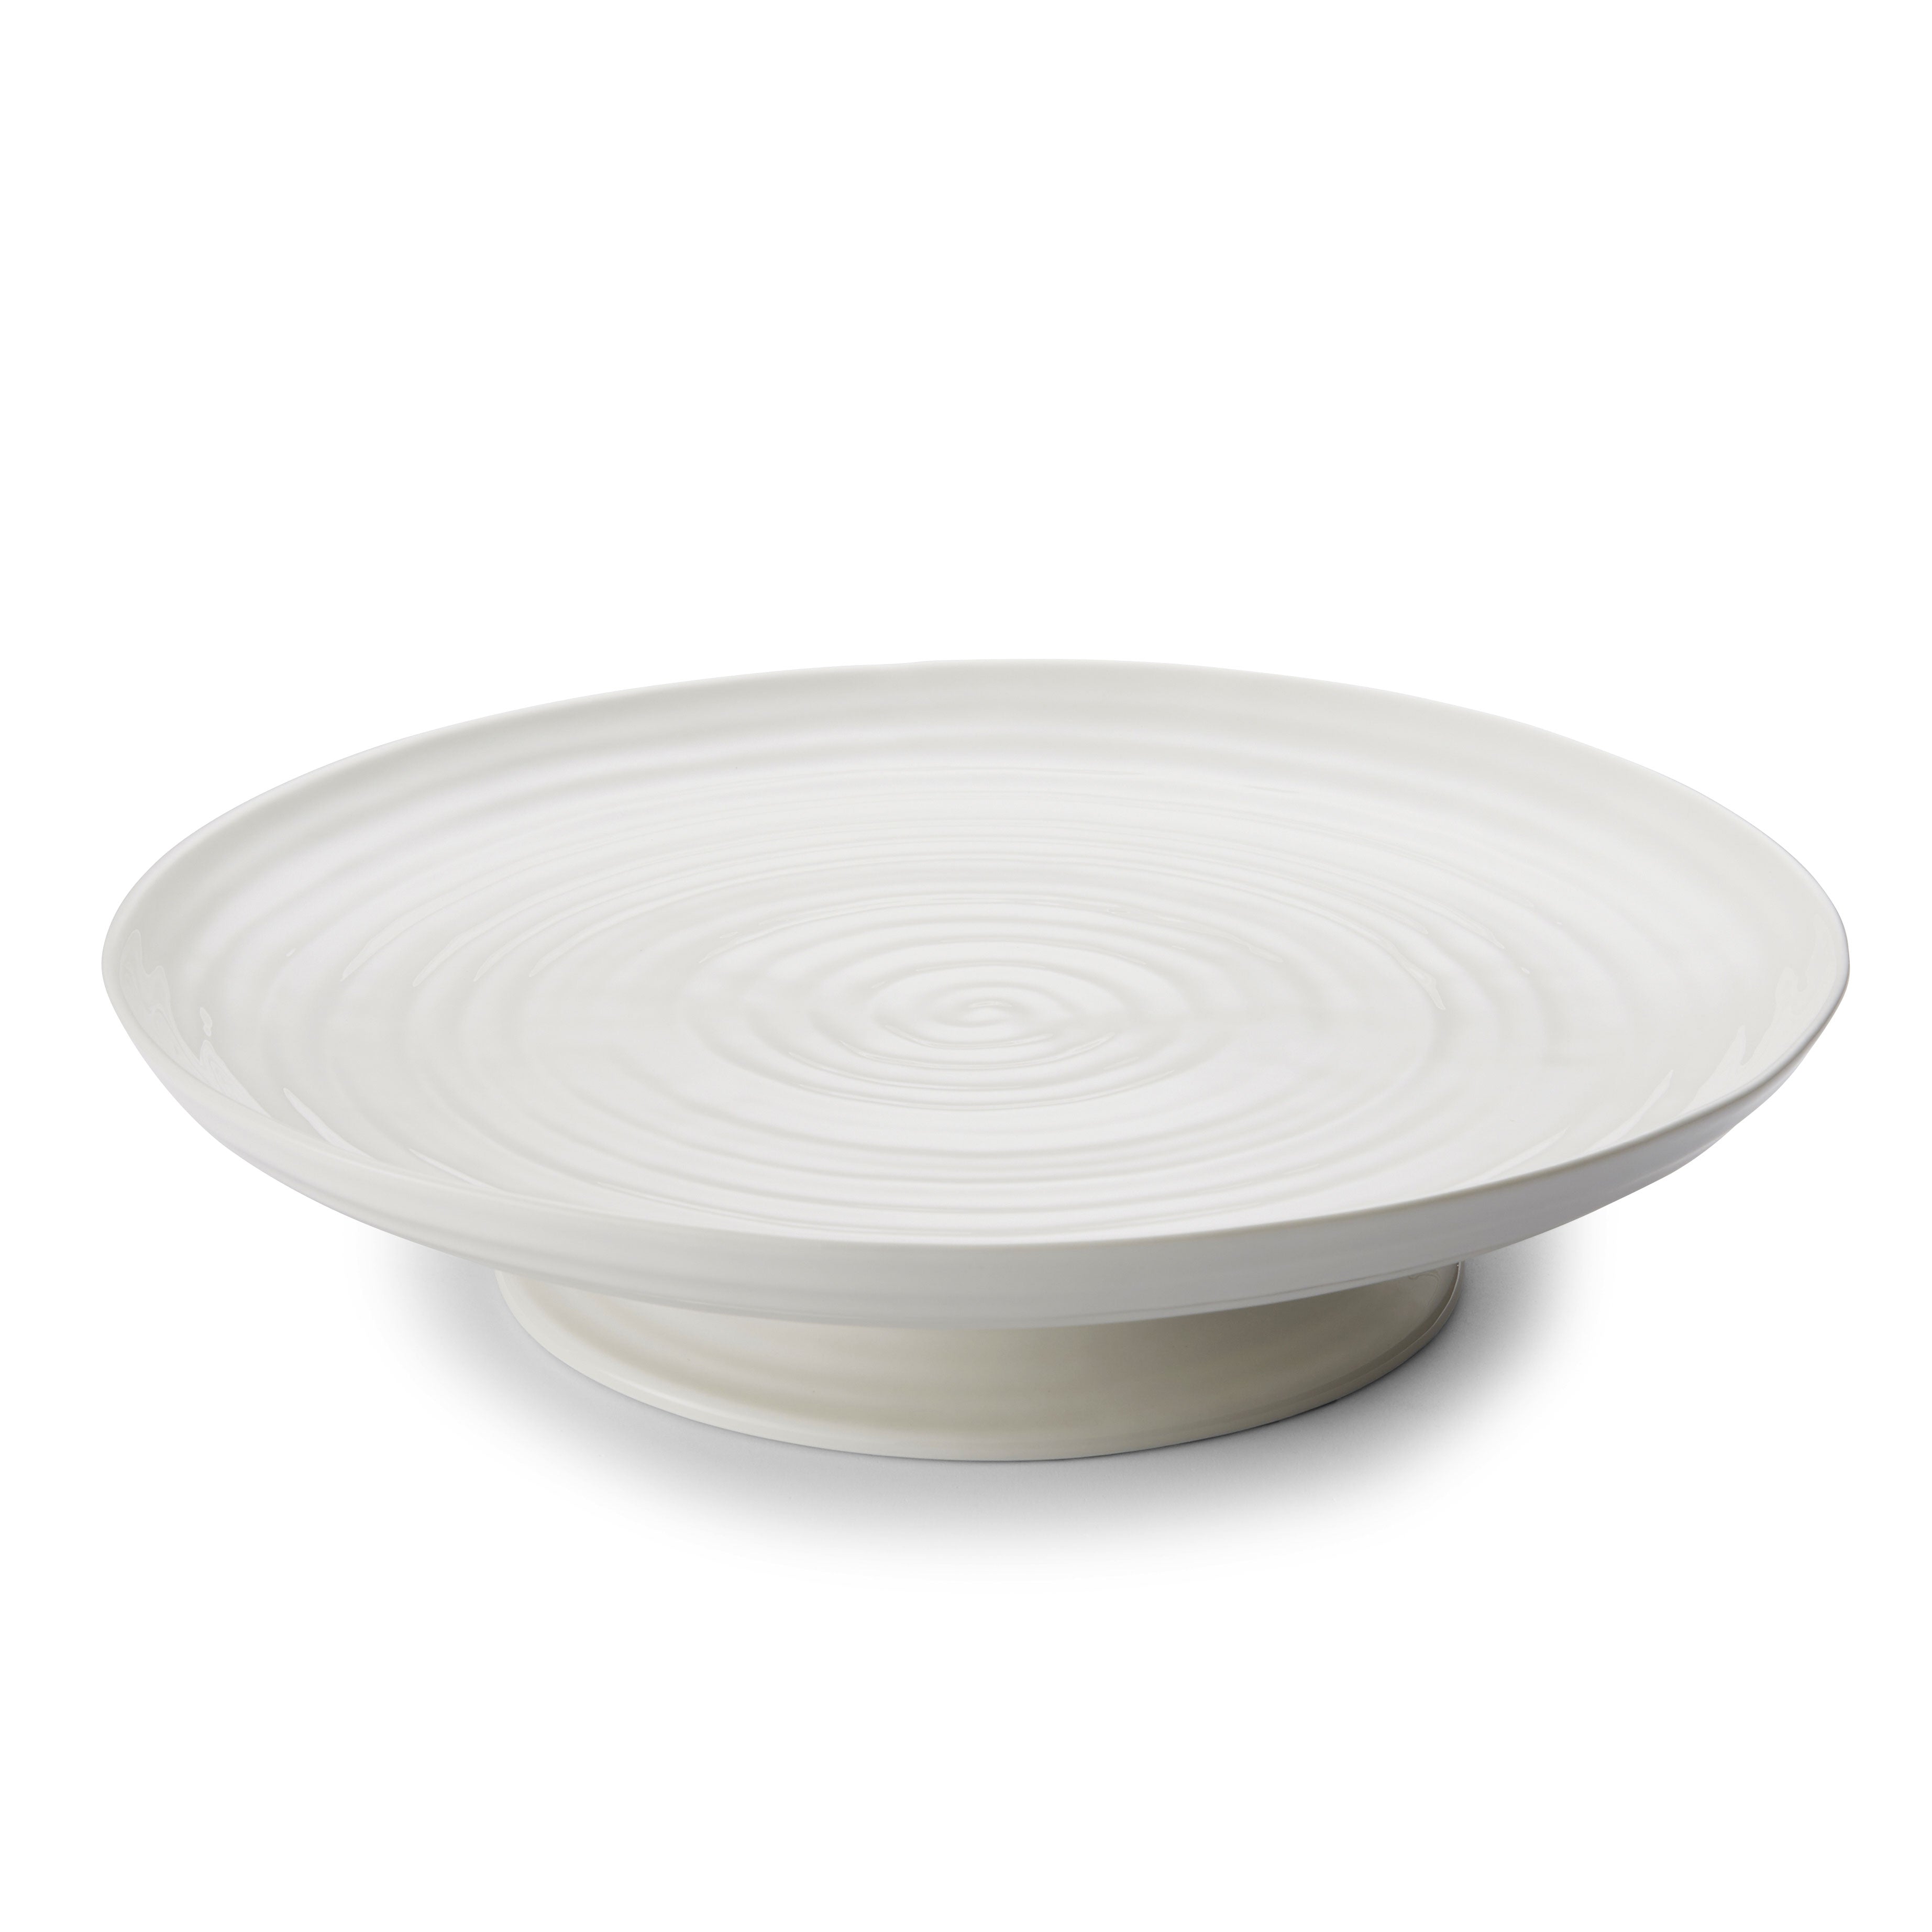 Portmeirion Sophie Conran White Footed Cake Plate Stand - Royal Gift